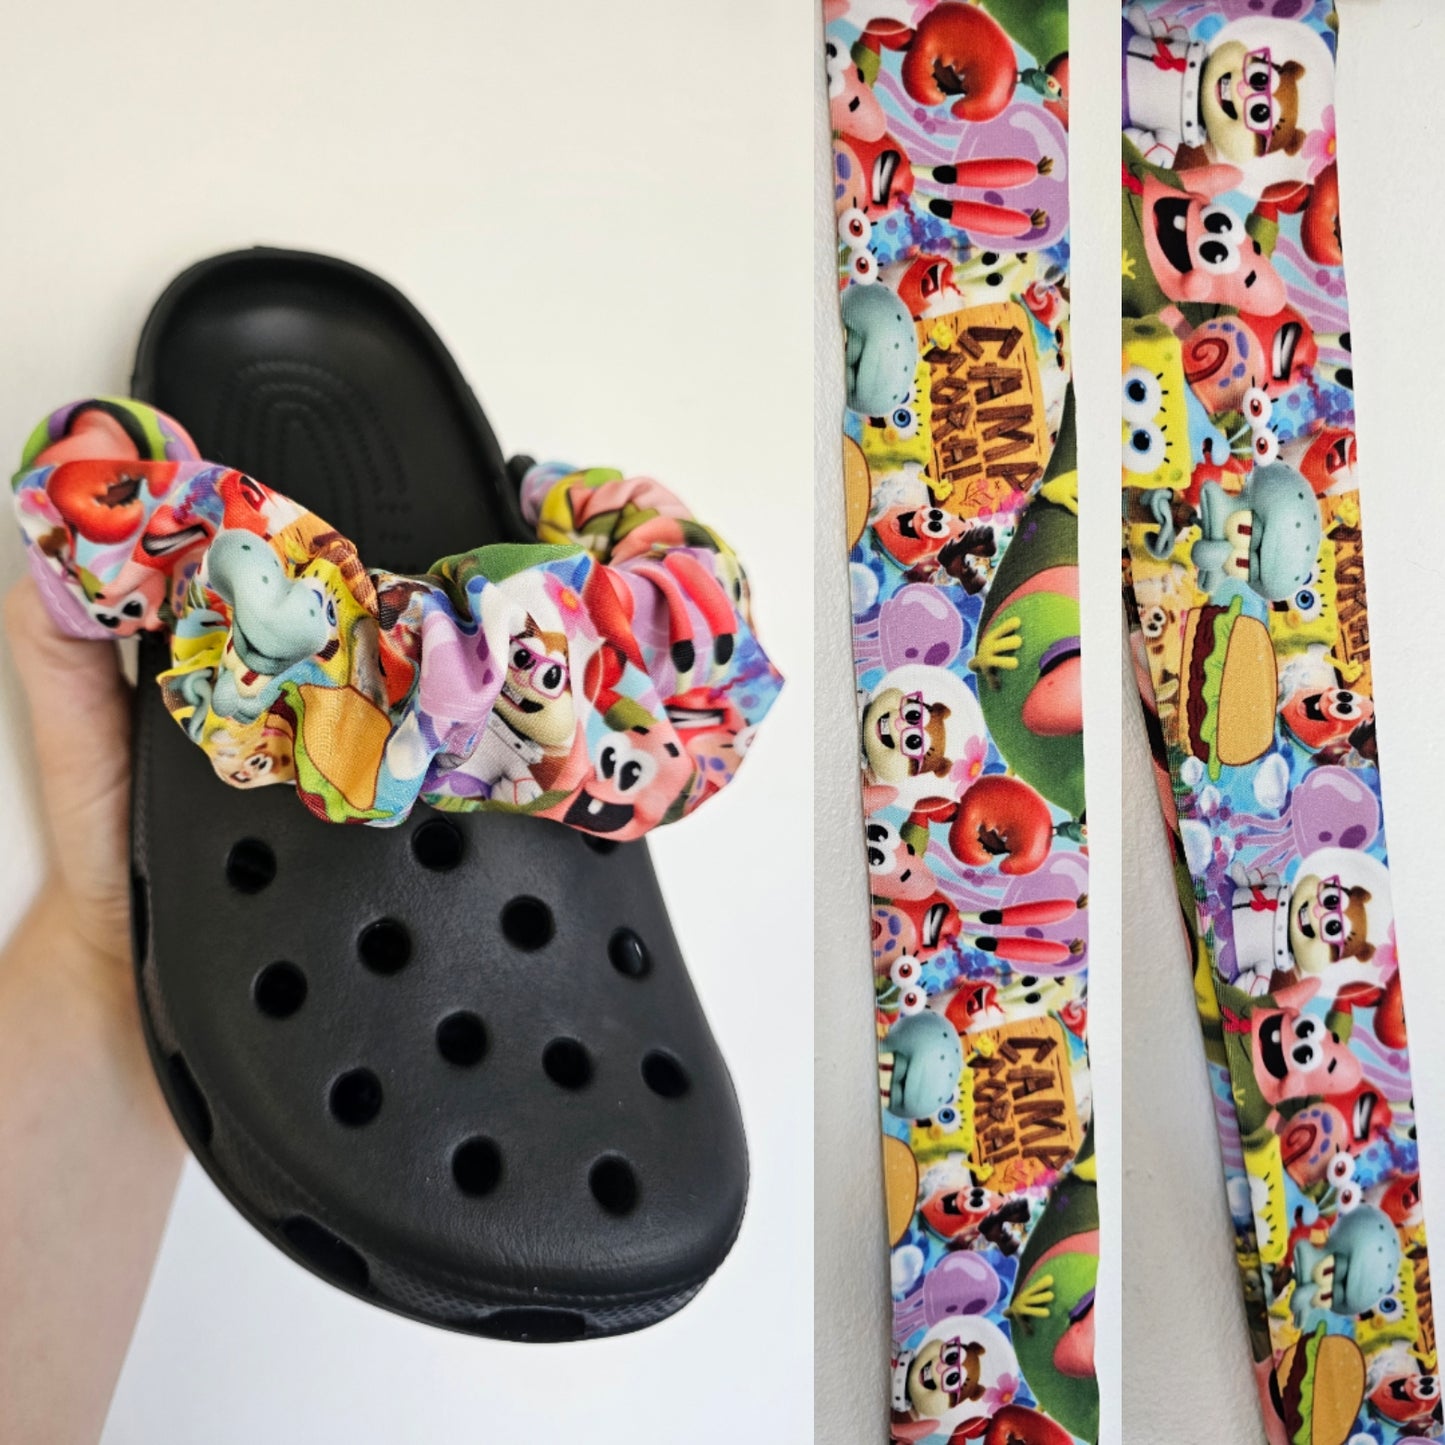 Spongebob strap covers - COME IN PAIRS